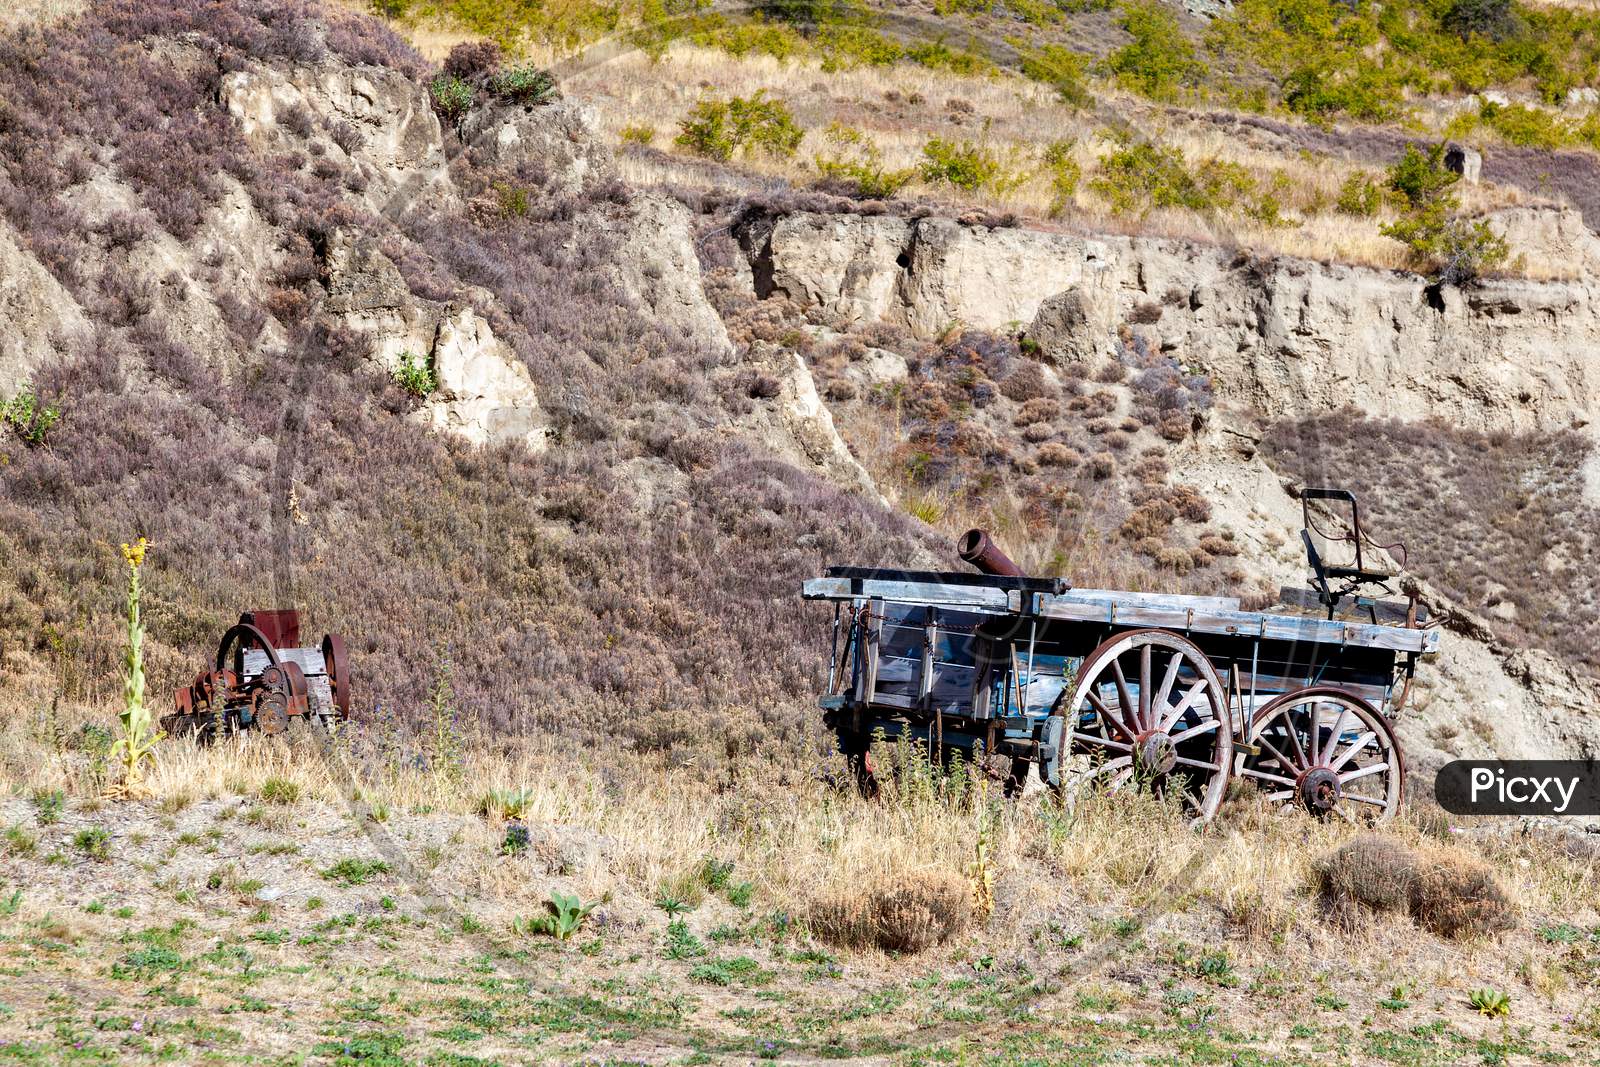 Ripponvale, Central Otago, New Zealand - February 17 : Old Wooden Cart In The Gold Mining Area Of Ripponvale In New Zealand On February 17, 2012